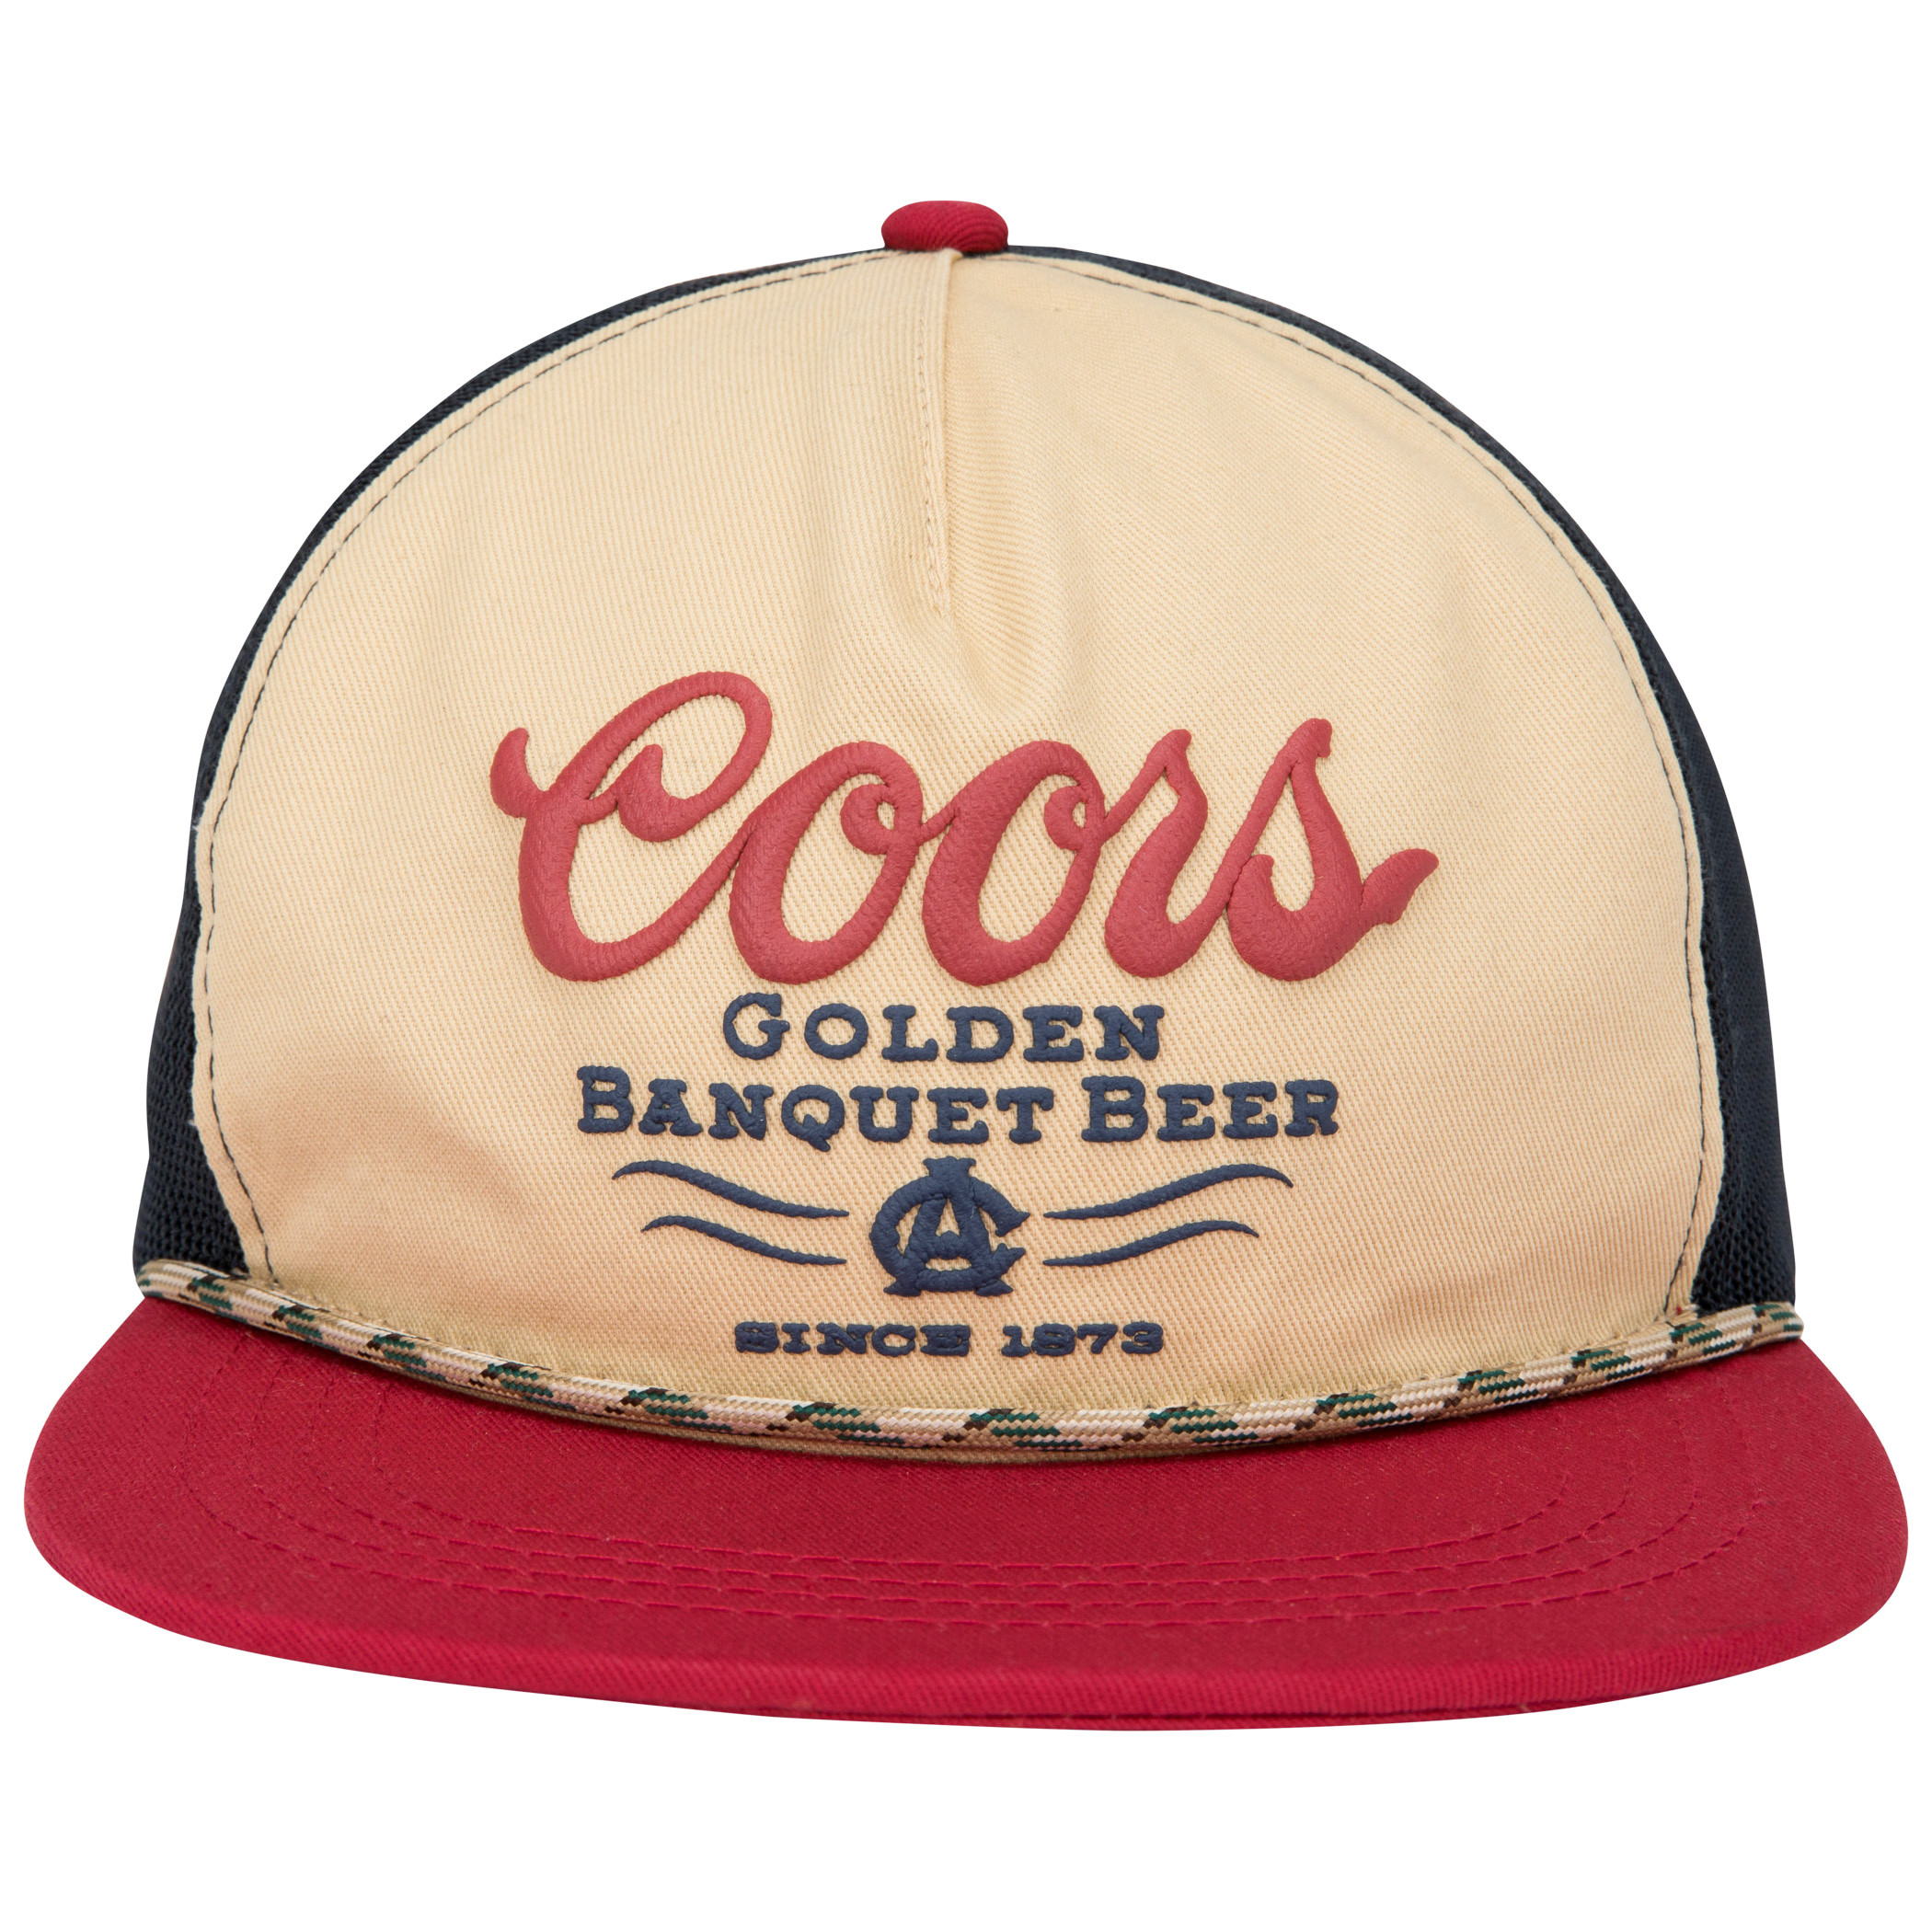 Coors Golden Banquet Beer Cotton Twill Rope Hat